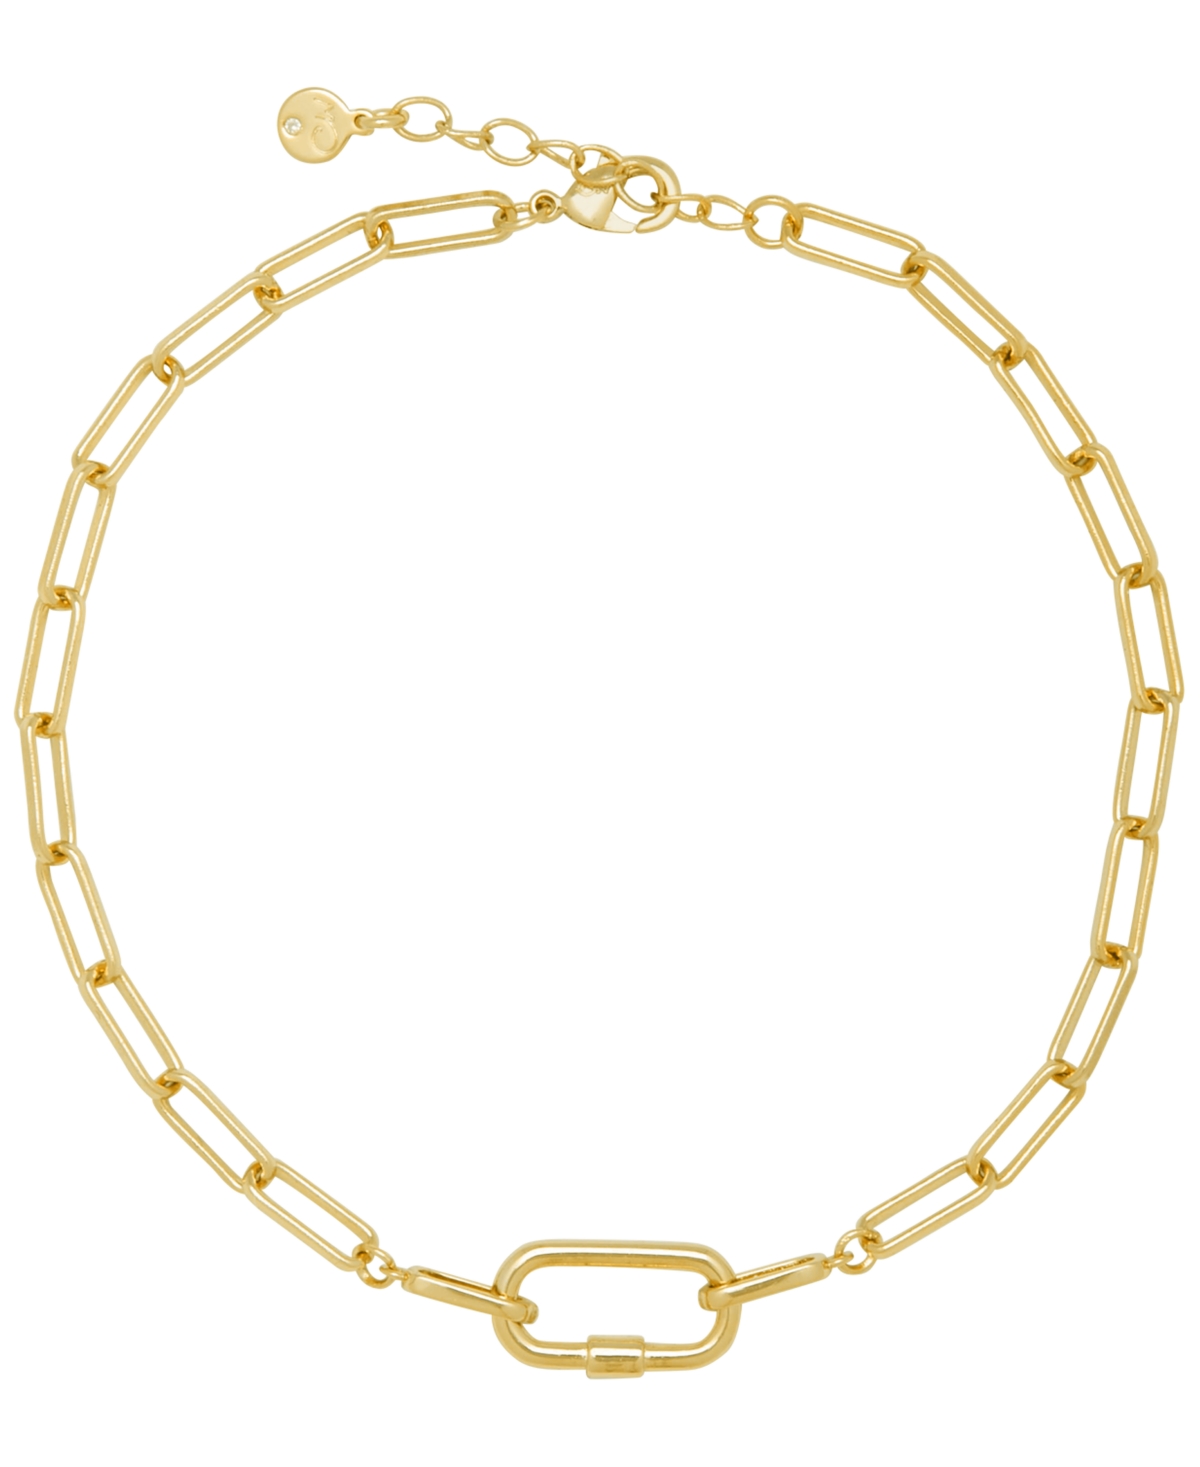 Women's Clip Chain Anklet - Gold Plated